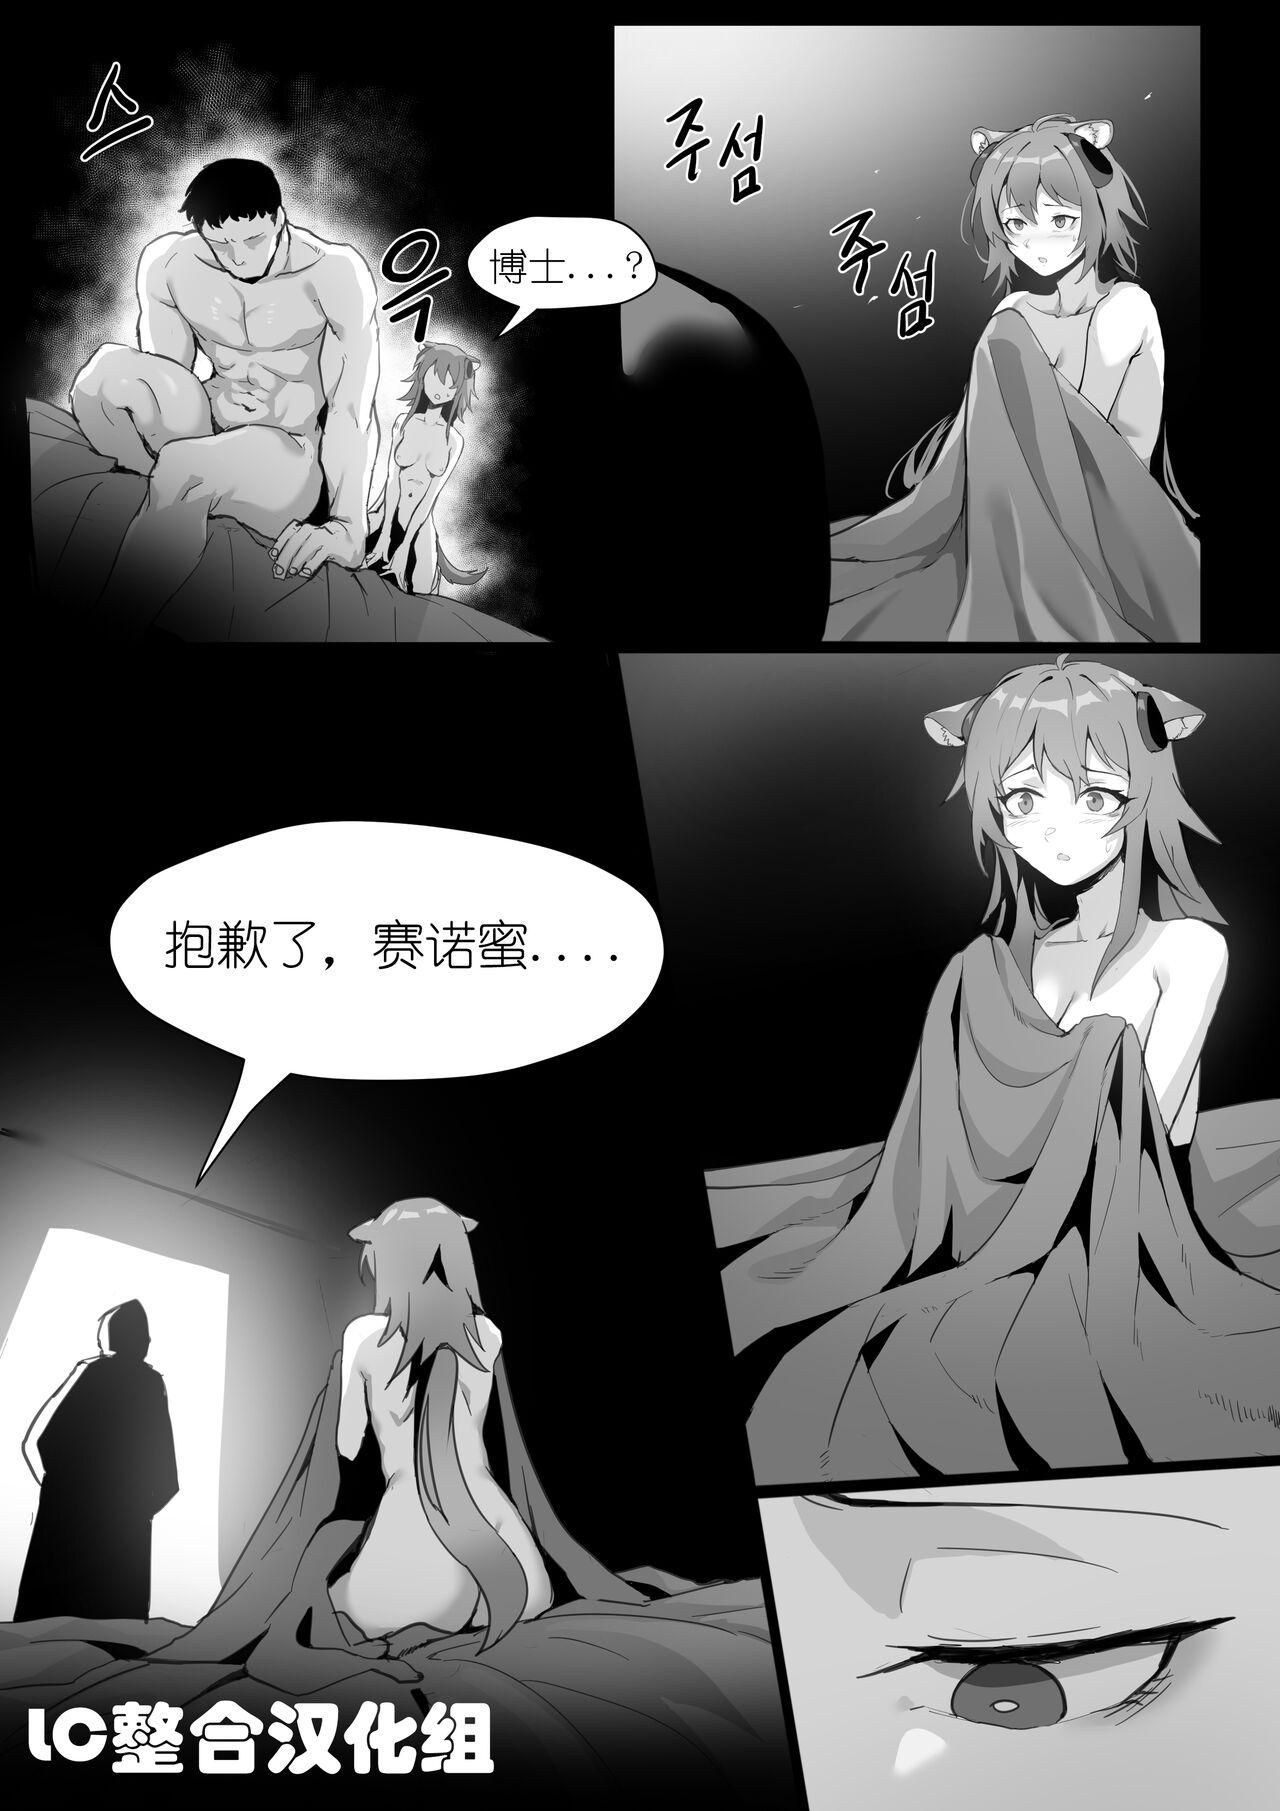 Dicks 欲望方舟记录3 - Arknights Tanned - Page 5